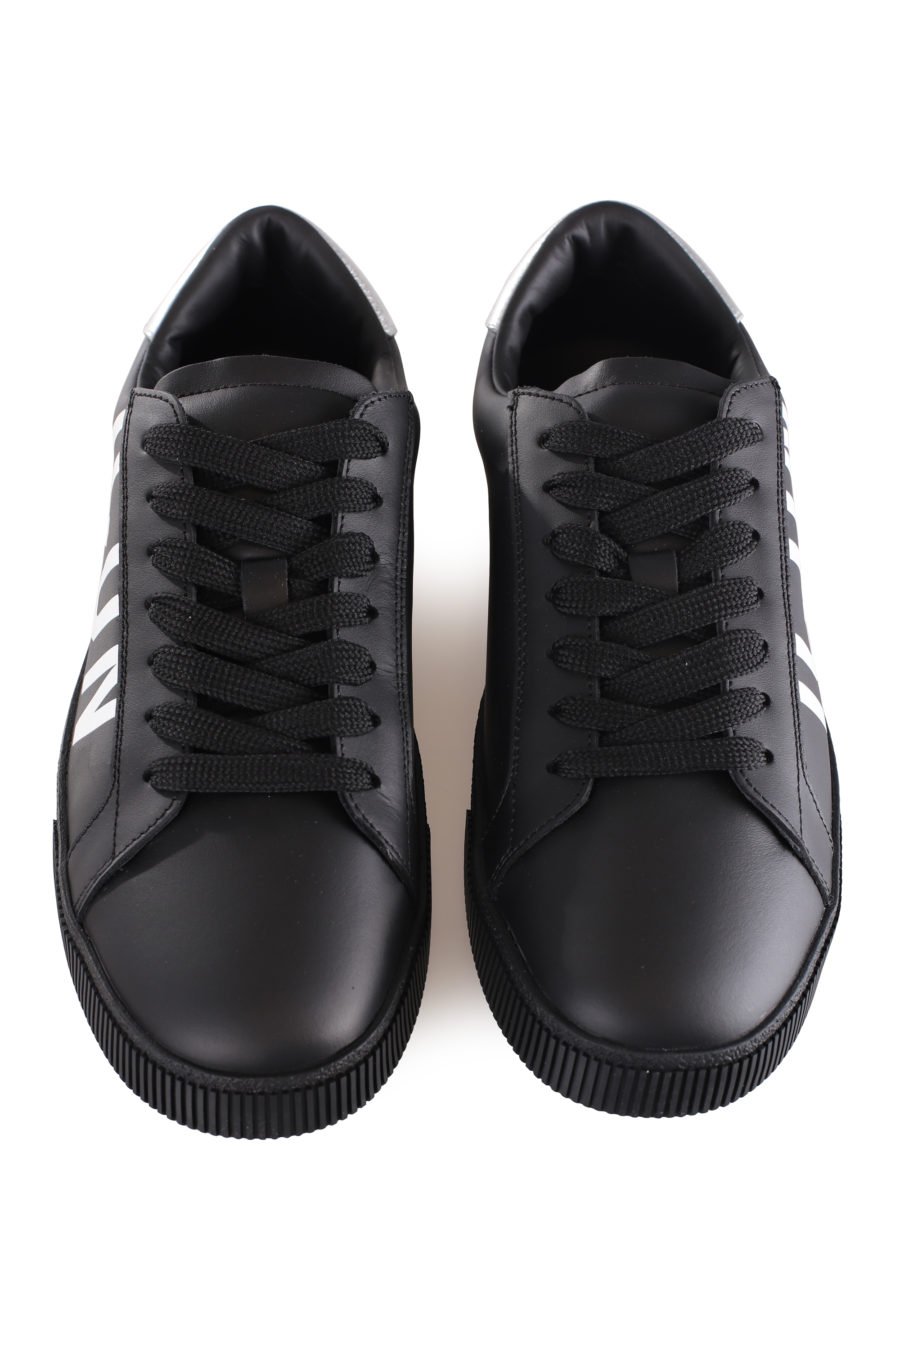 Black trainers with diagonal "icon" logo and silver detail - IMG 9598